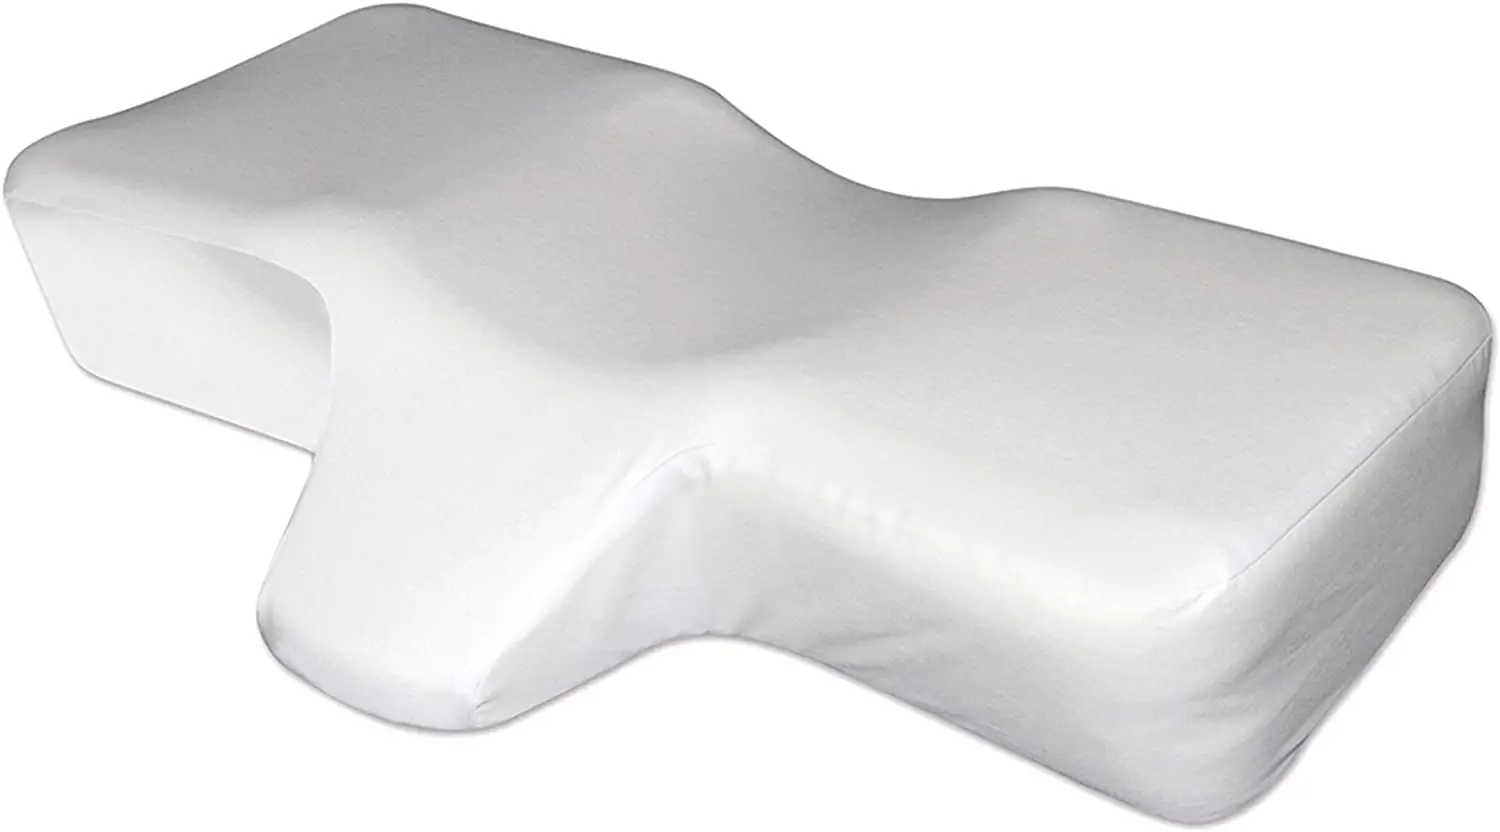 Therapeutica Sleeping Pillow Review